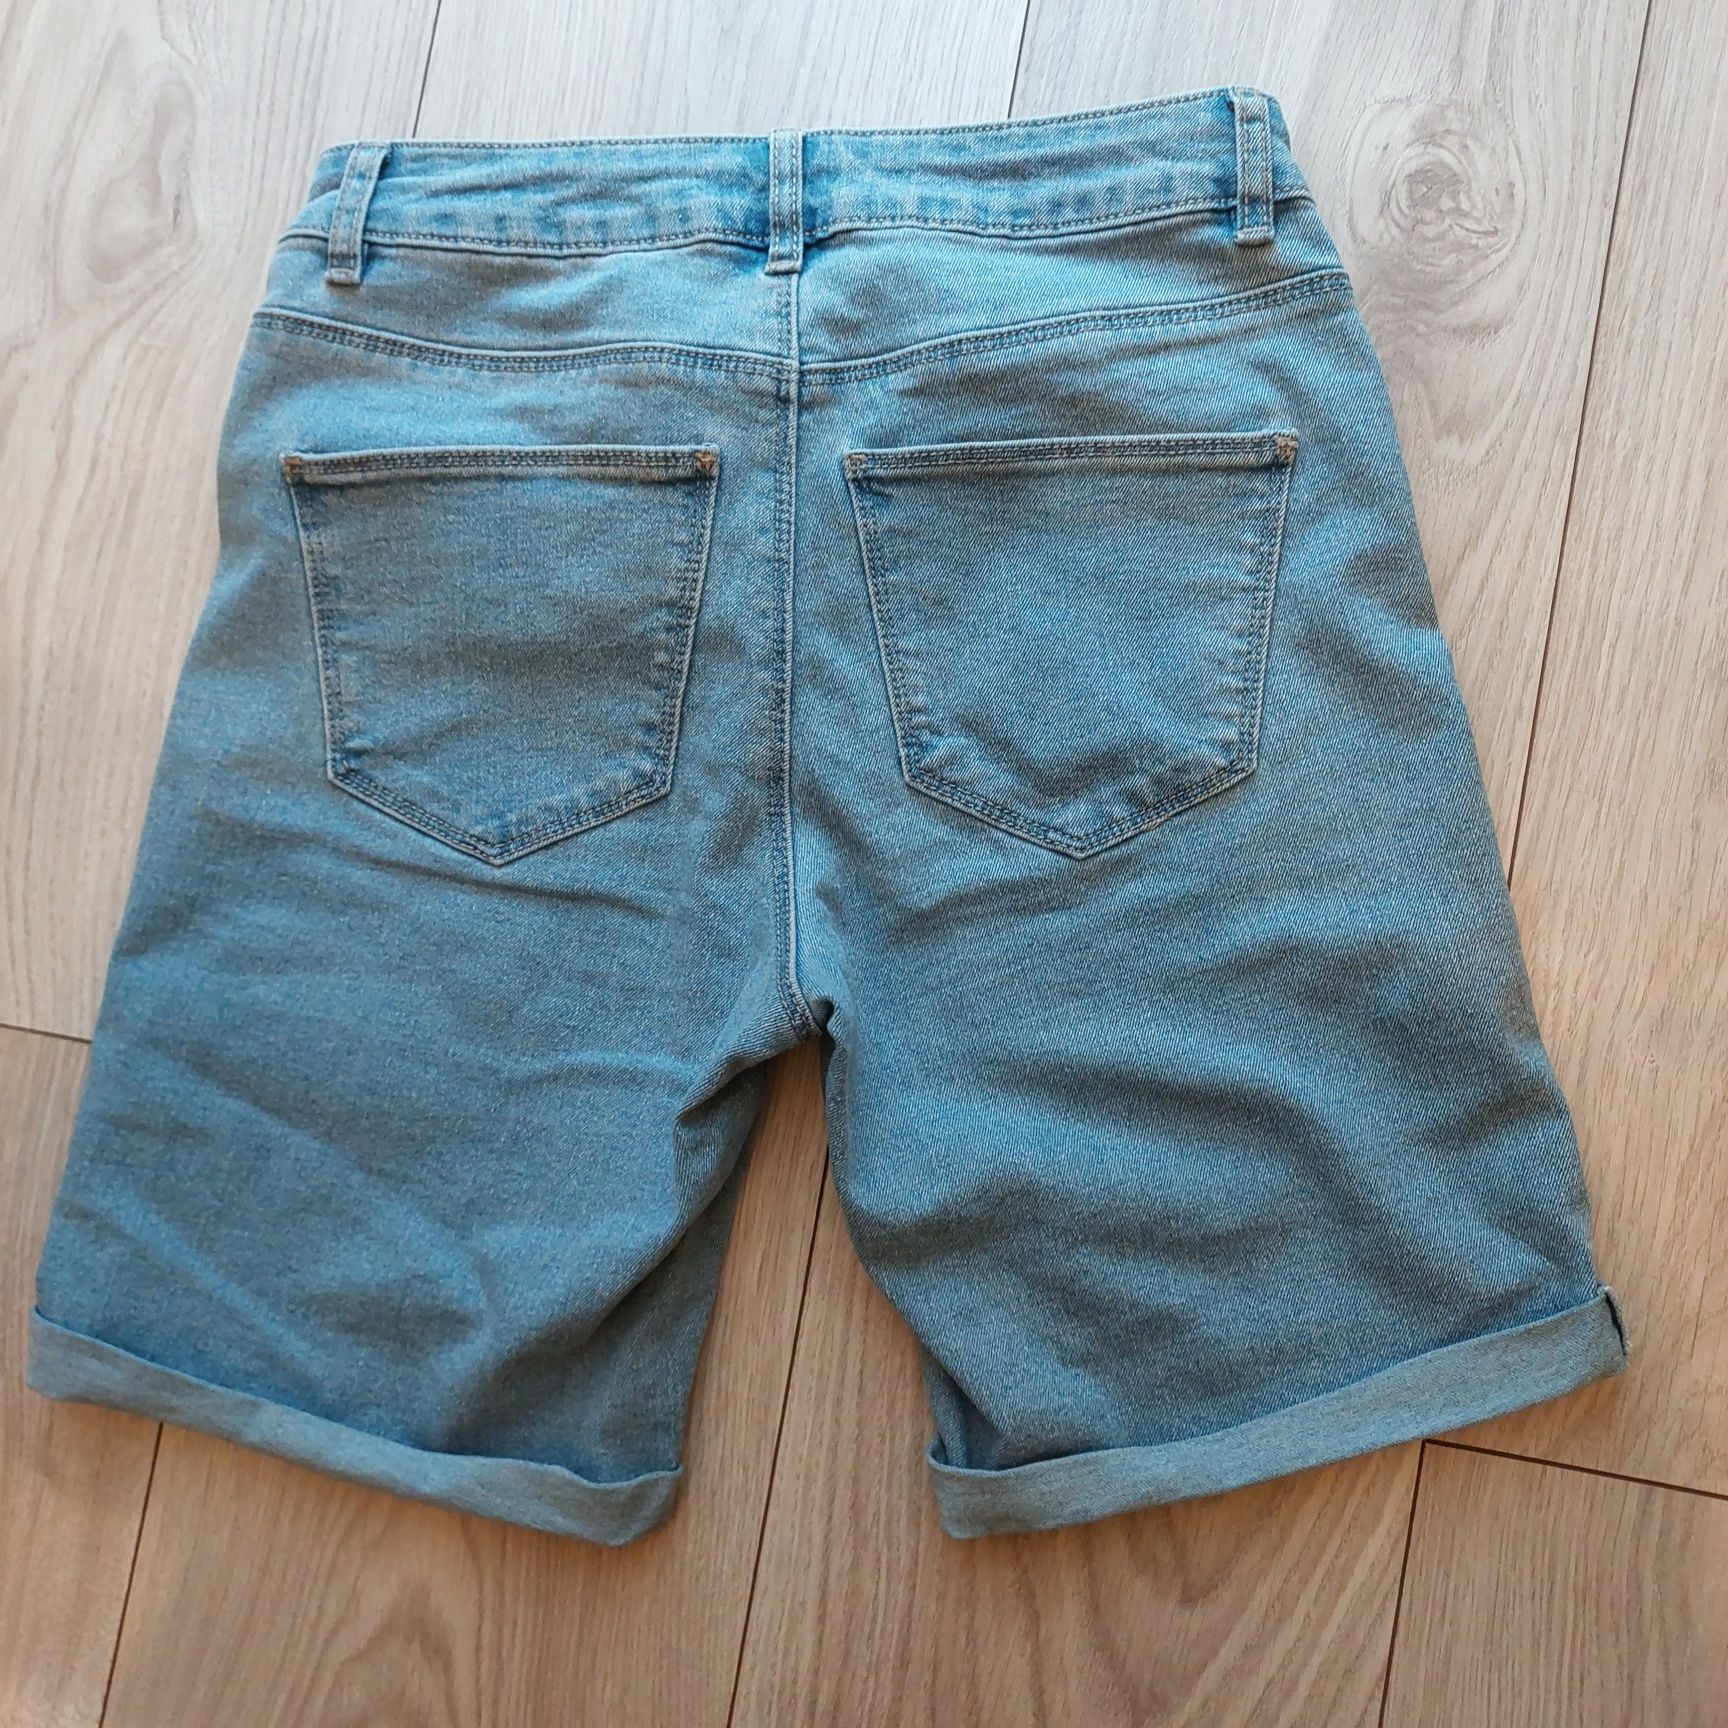 Spodenki jeans  XS only